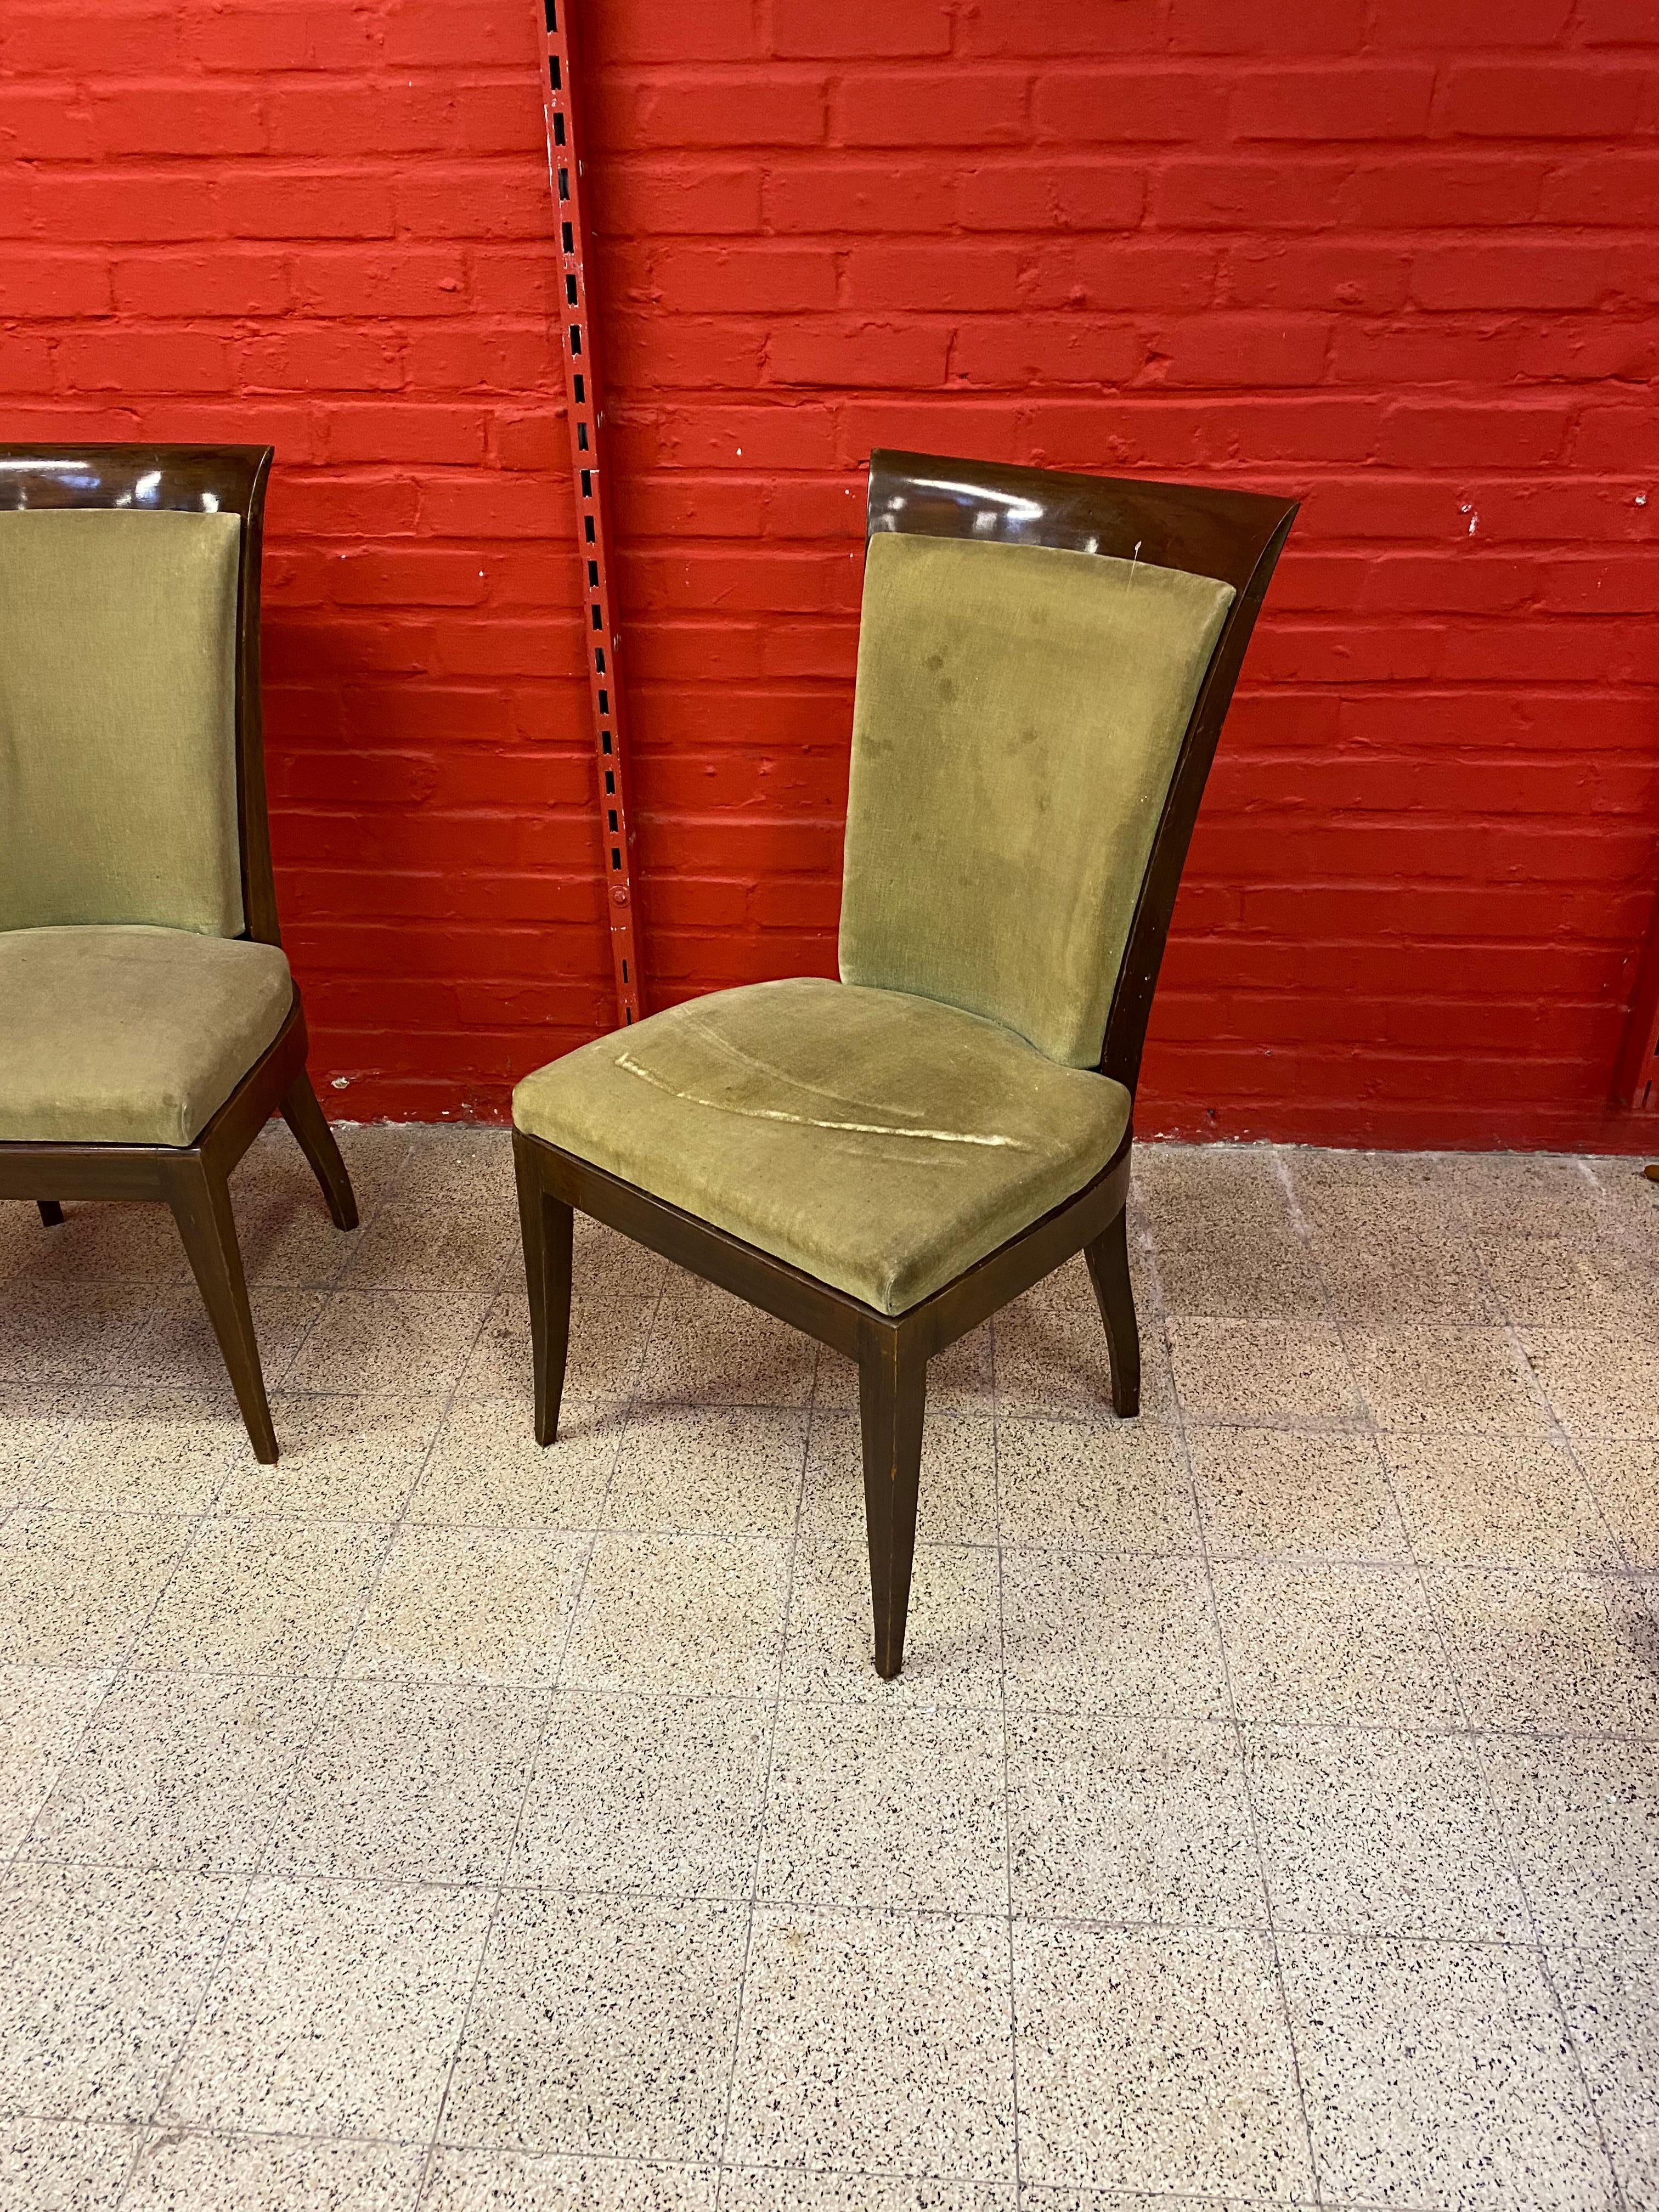 De Coene, 3 Large Art Deco Chairs in Solid Mahogany and Velvet, circa 1930 In Good Condition For Sale In Saint-Ouen, FR